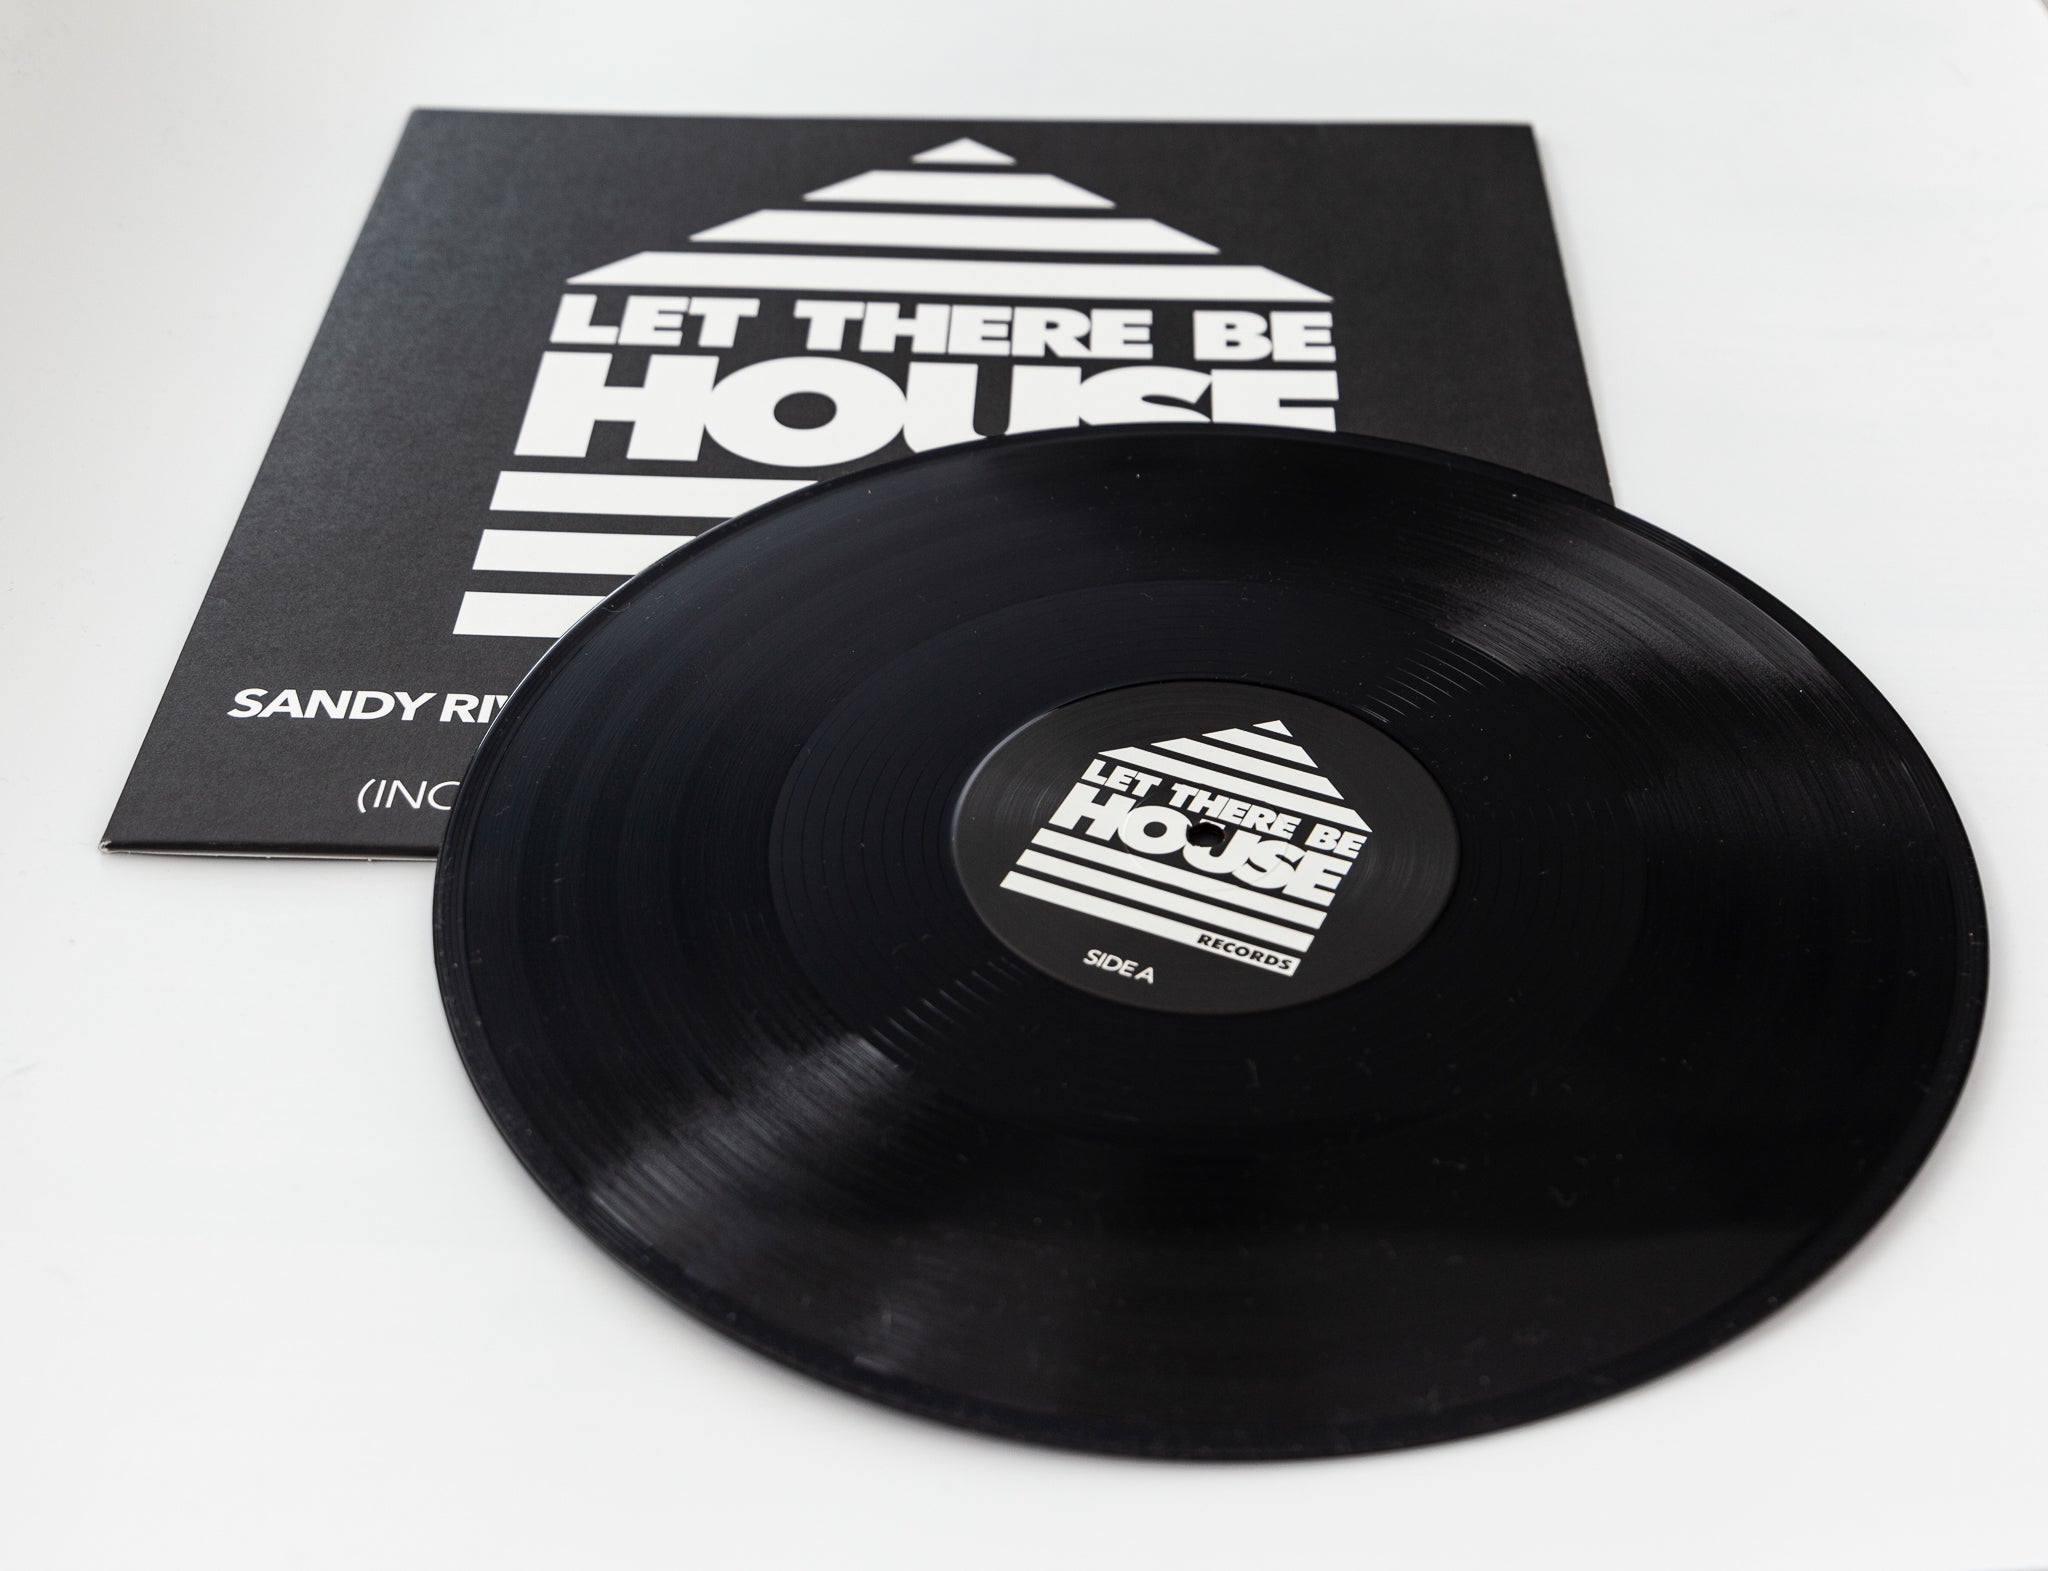 Limited Edition Vinyl - LTBH100